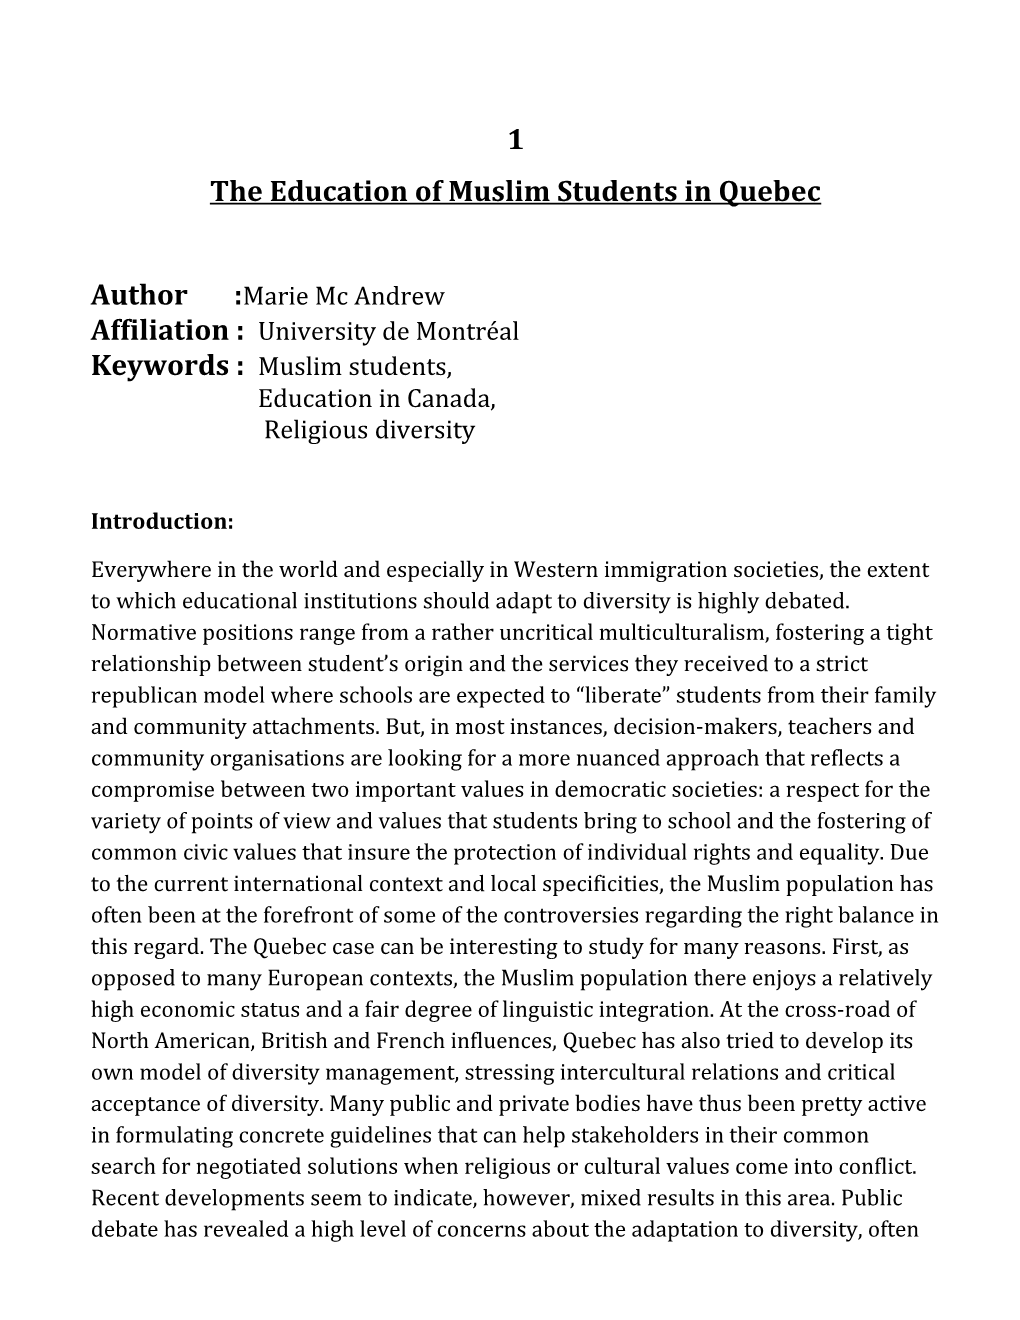 The Education of Muslim Students in Quebec